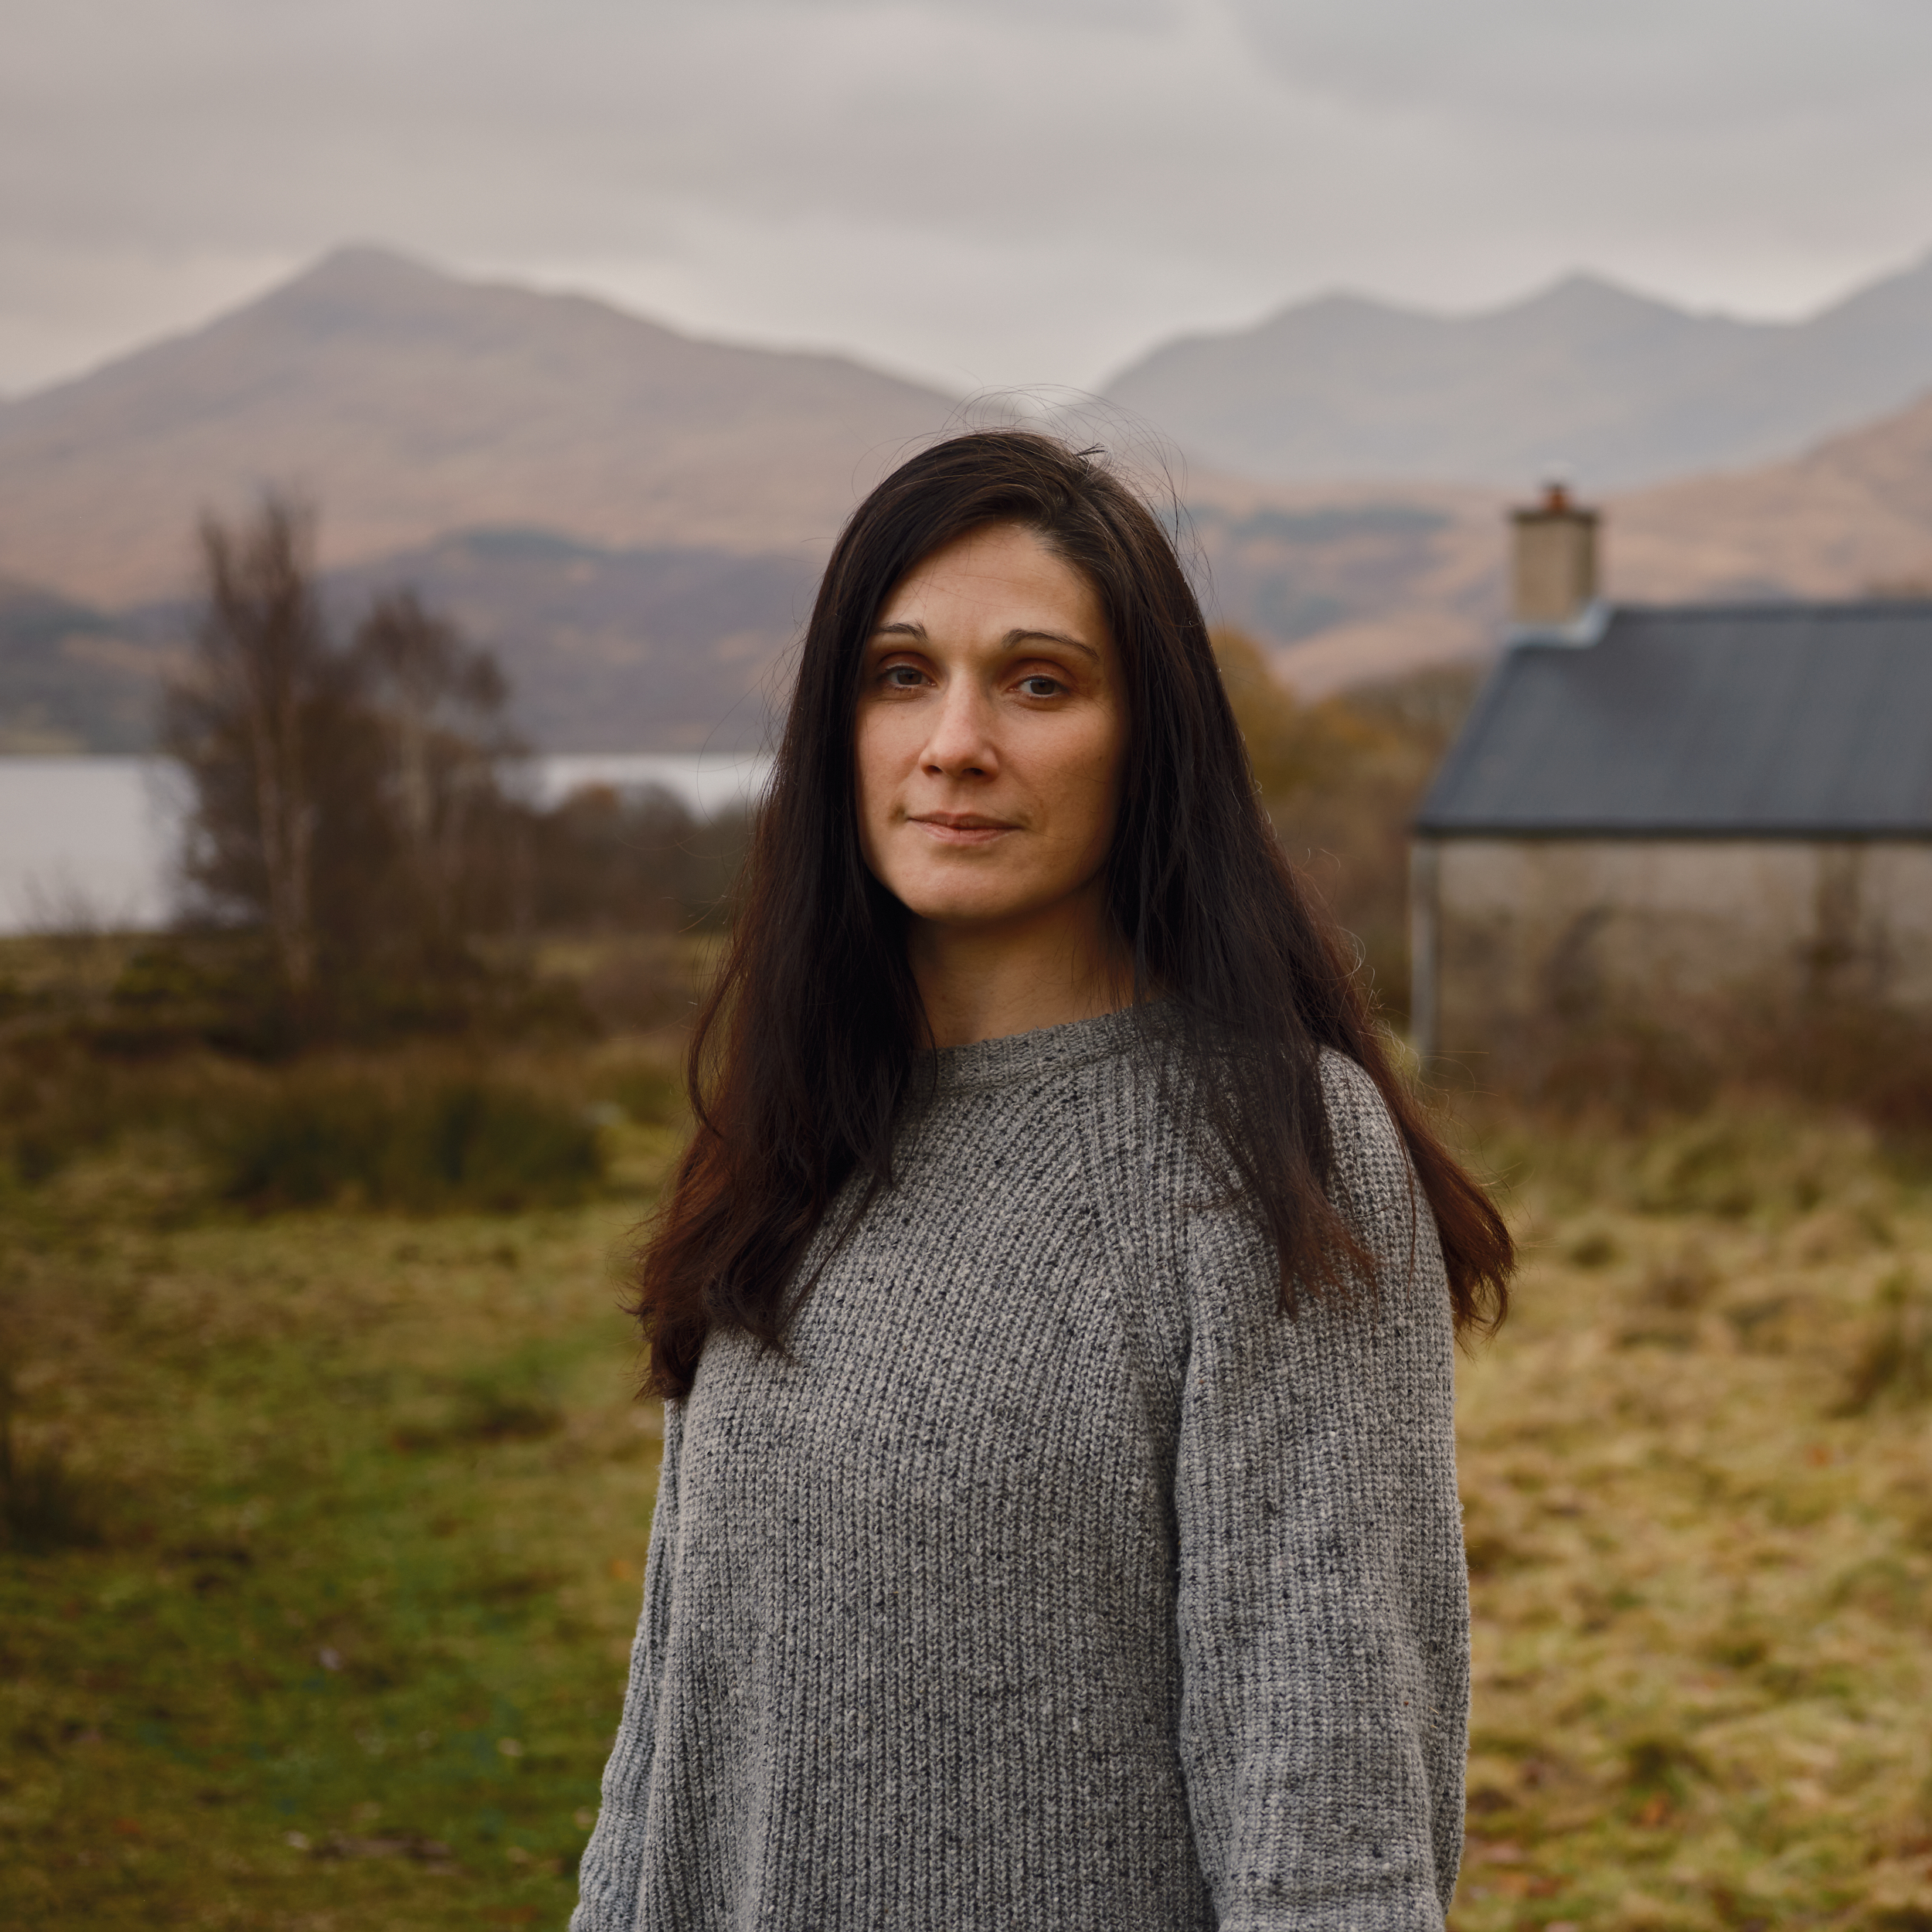 Portrait photograph of Kat Hill wearing a grey woollen jumper, stood in front of a Scottish bothy with mountains, lakes and trees in the background.